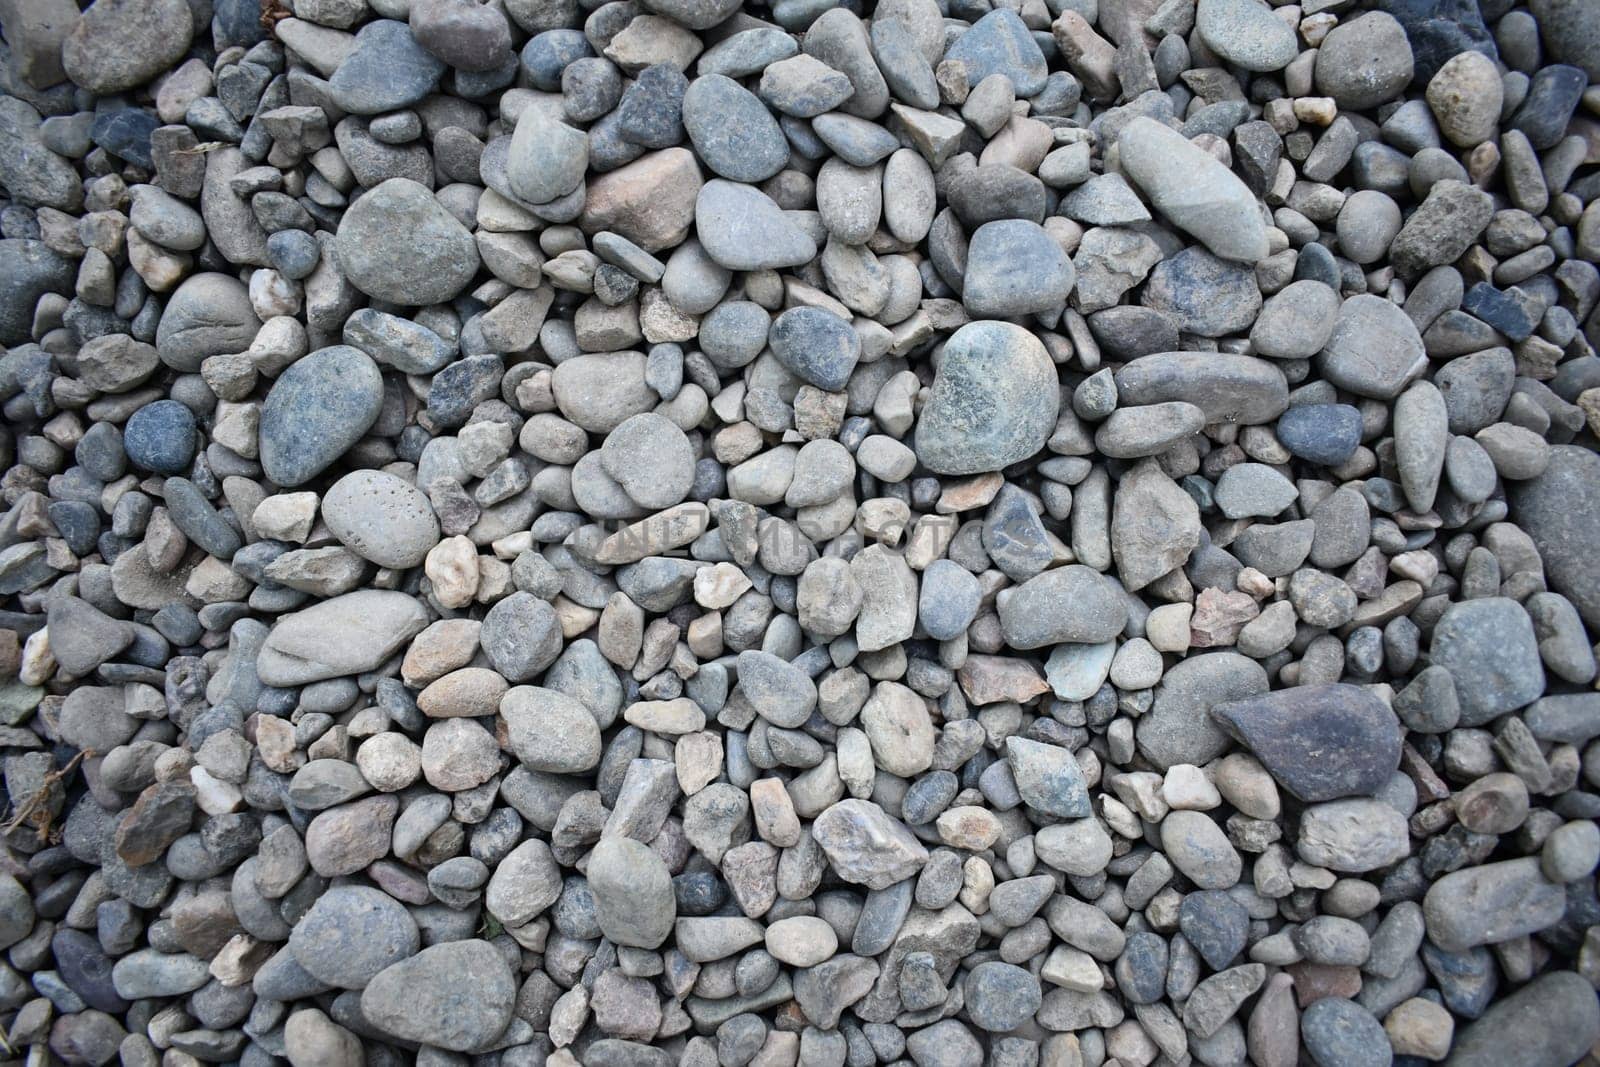 Medium Large Smooth Pebble Texture on Ground of Trail. High quality photo